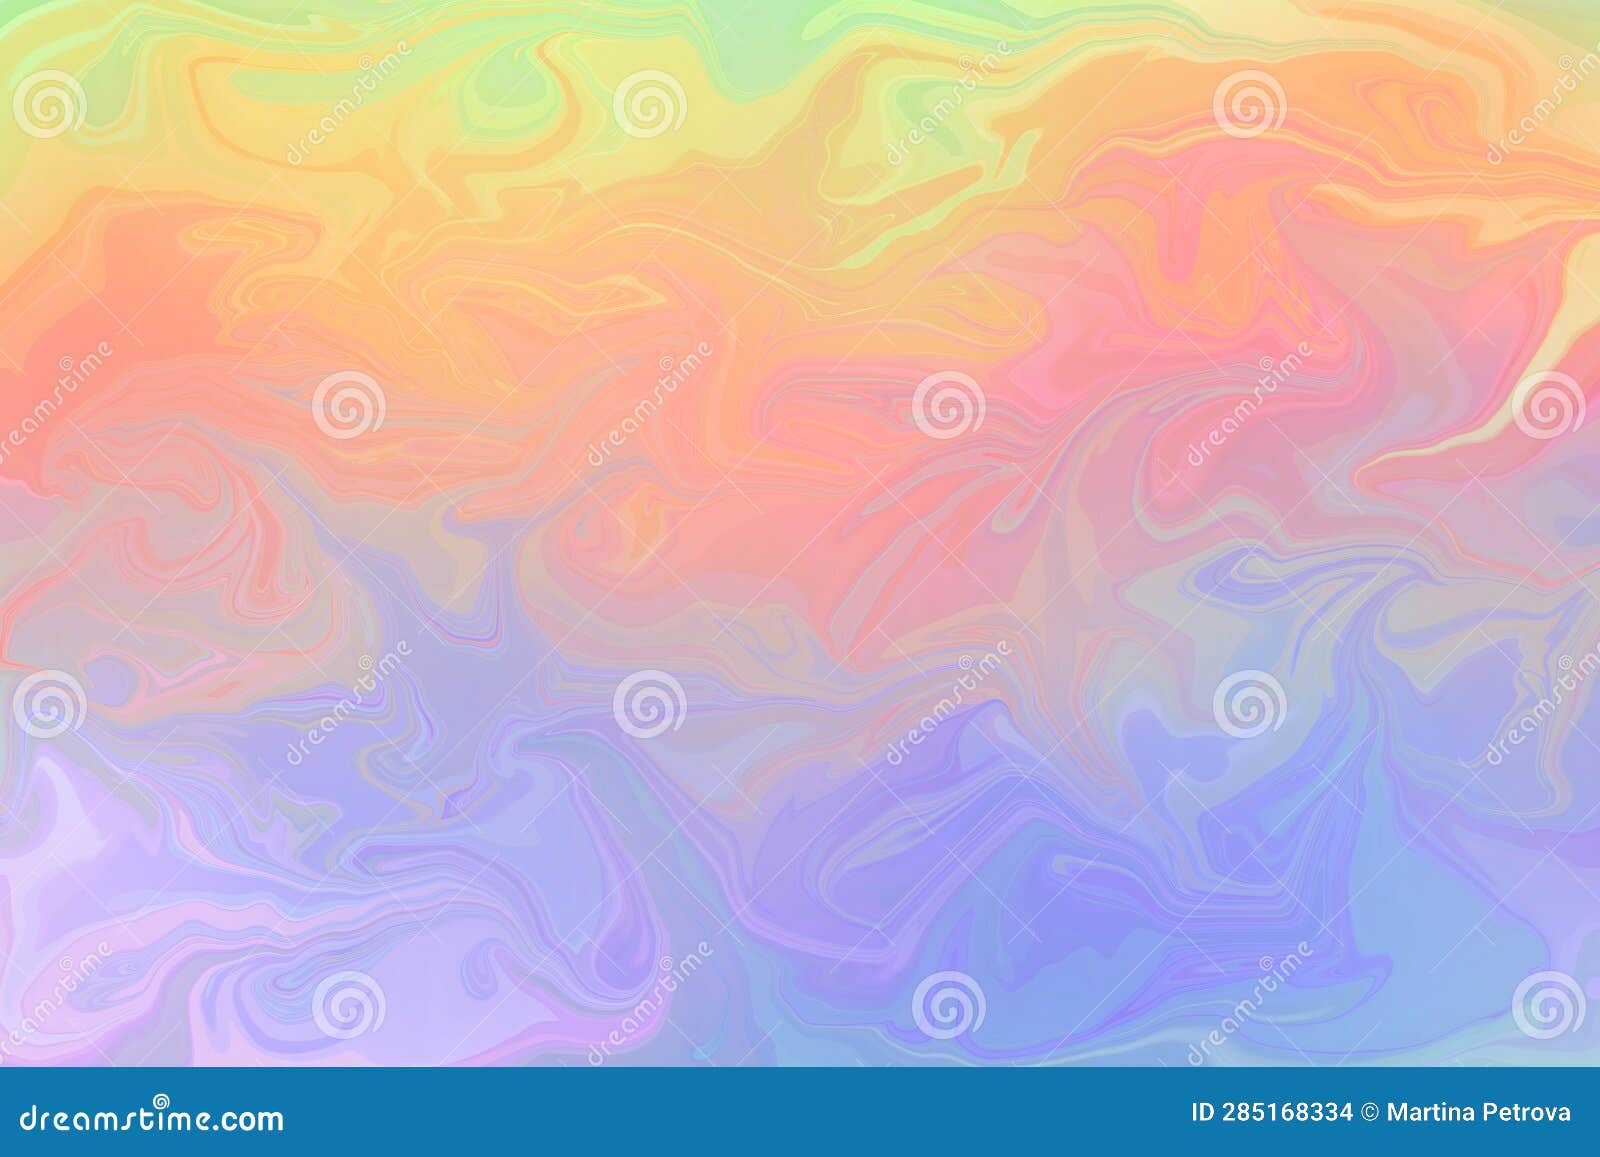 background, blending pastel shades of yellow, pink, orange and blue reminiscent of oil slicks